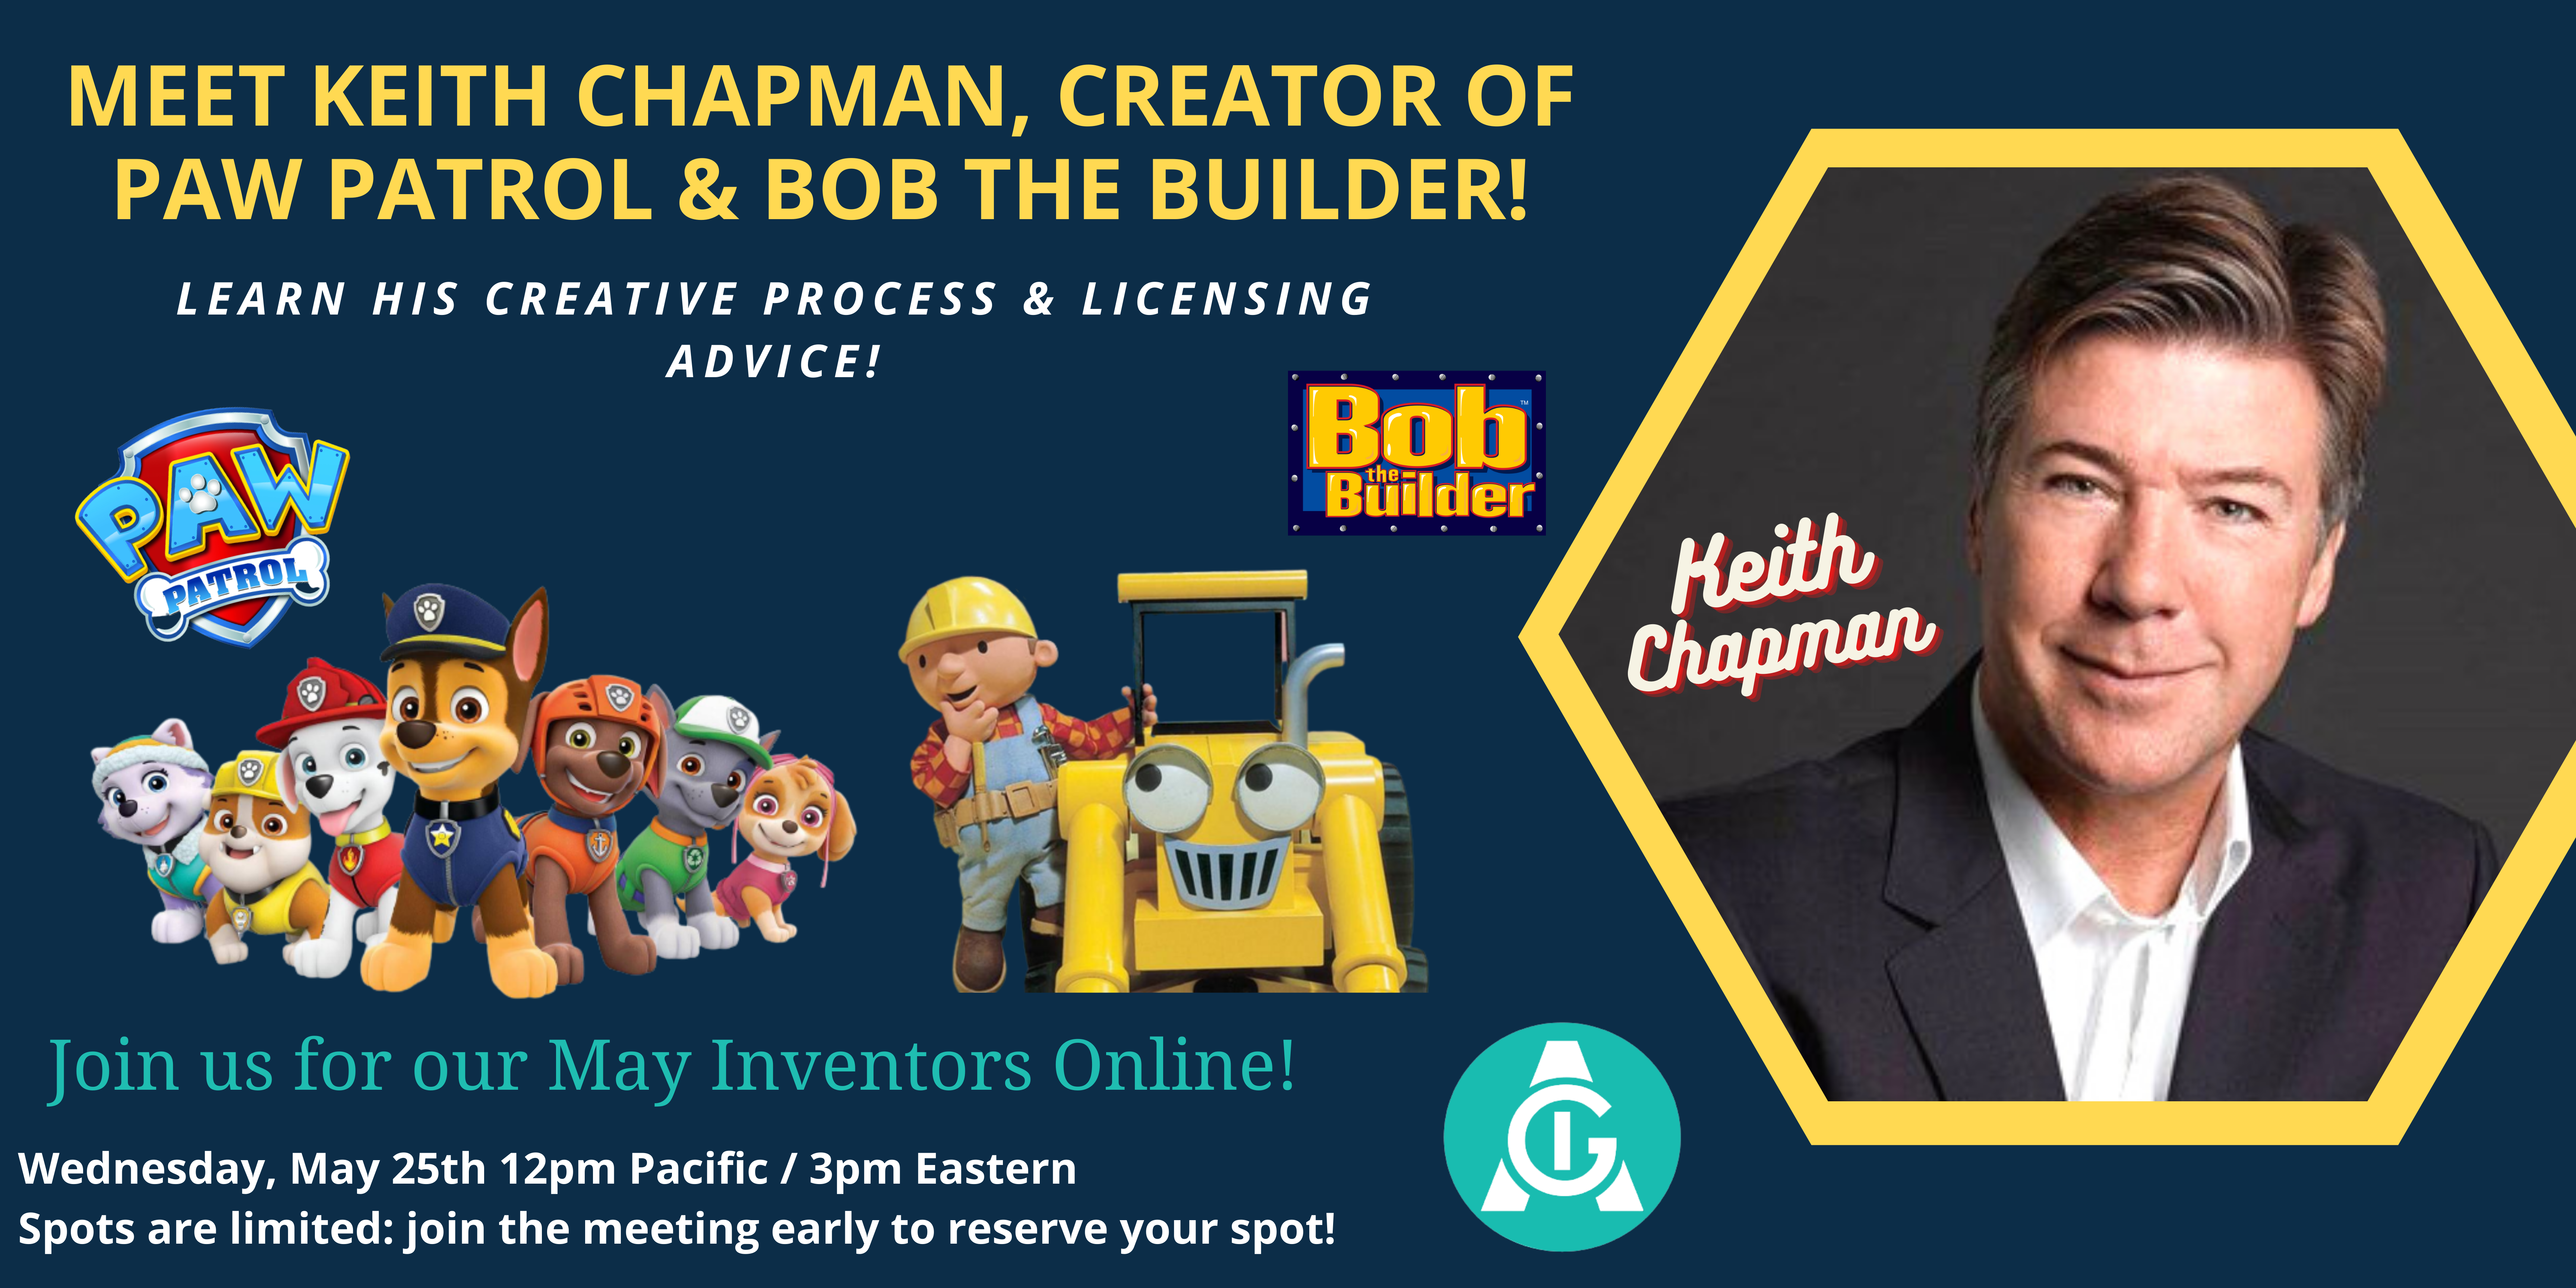 <h3><strong>Meet Keith Chapman, the Creator of PAW Patrol & Bob the Builder!</strong></h3>